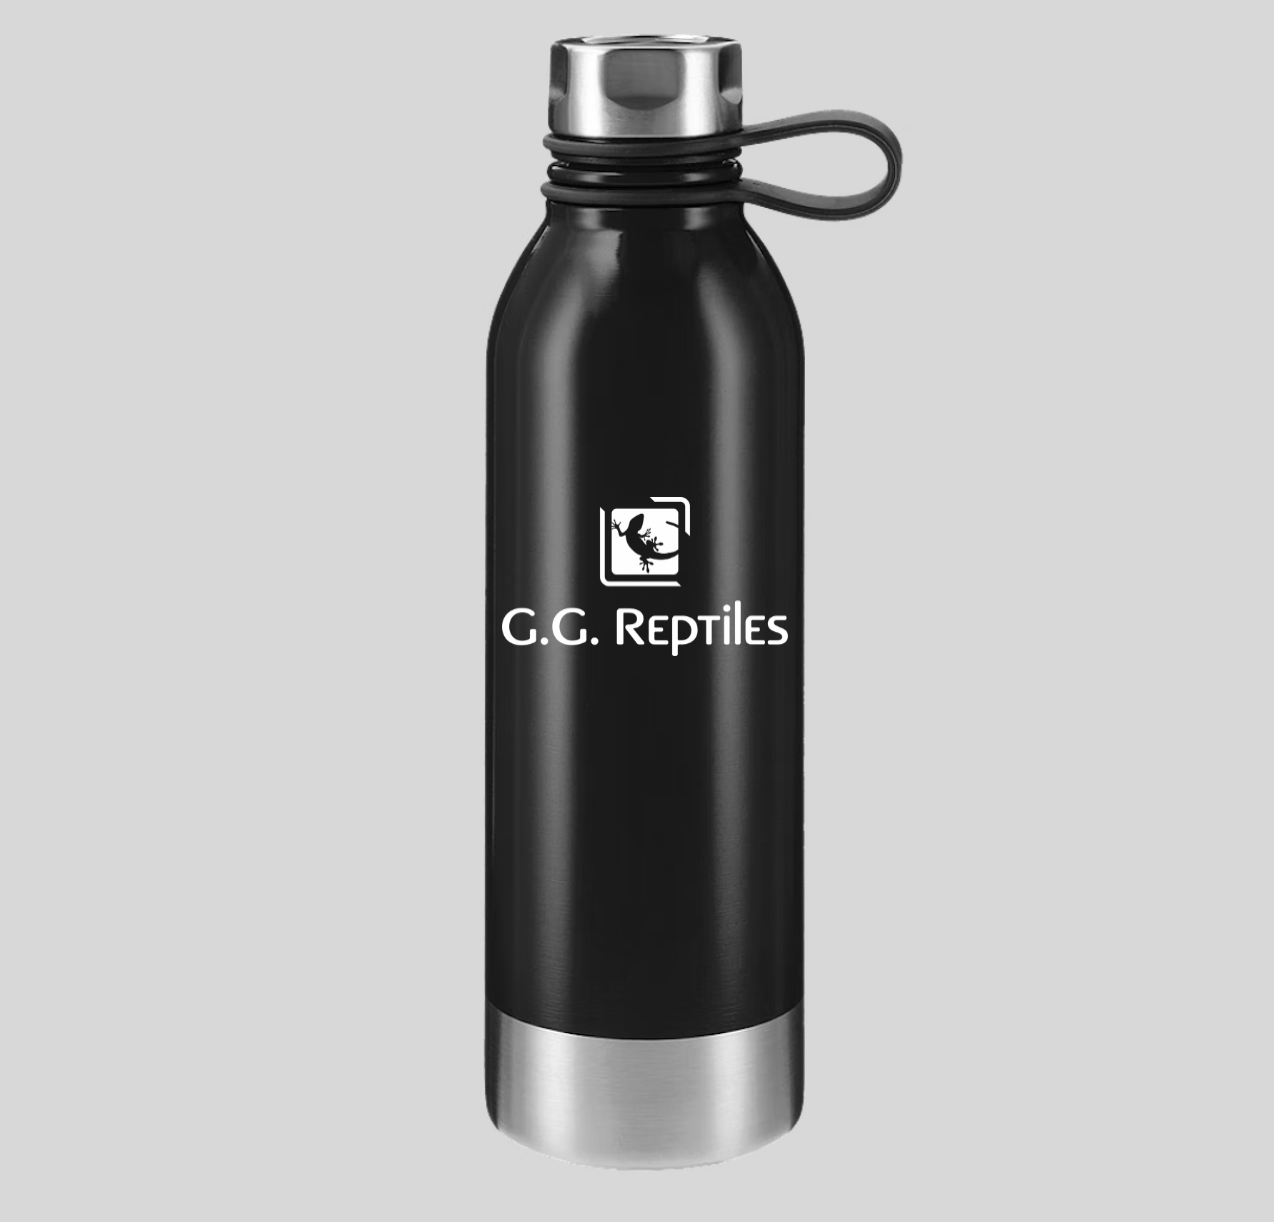 G.G. Reptiles Stainless Steel Water Bottle 24 oz.